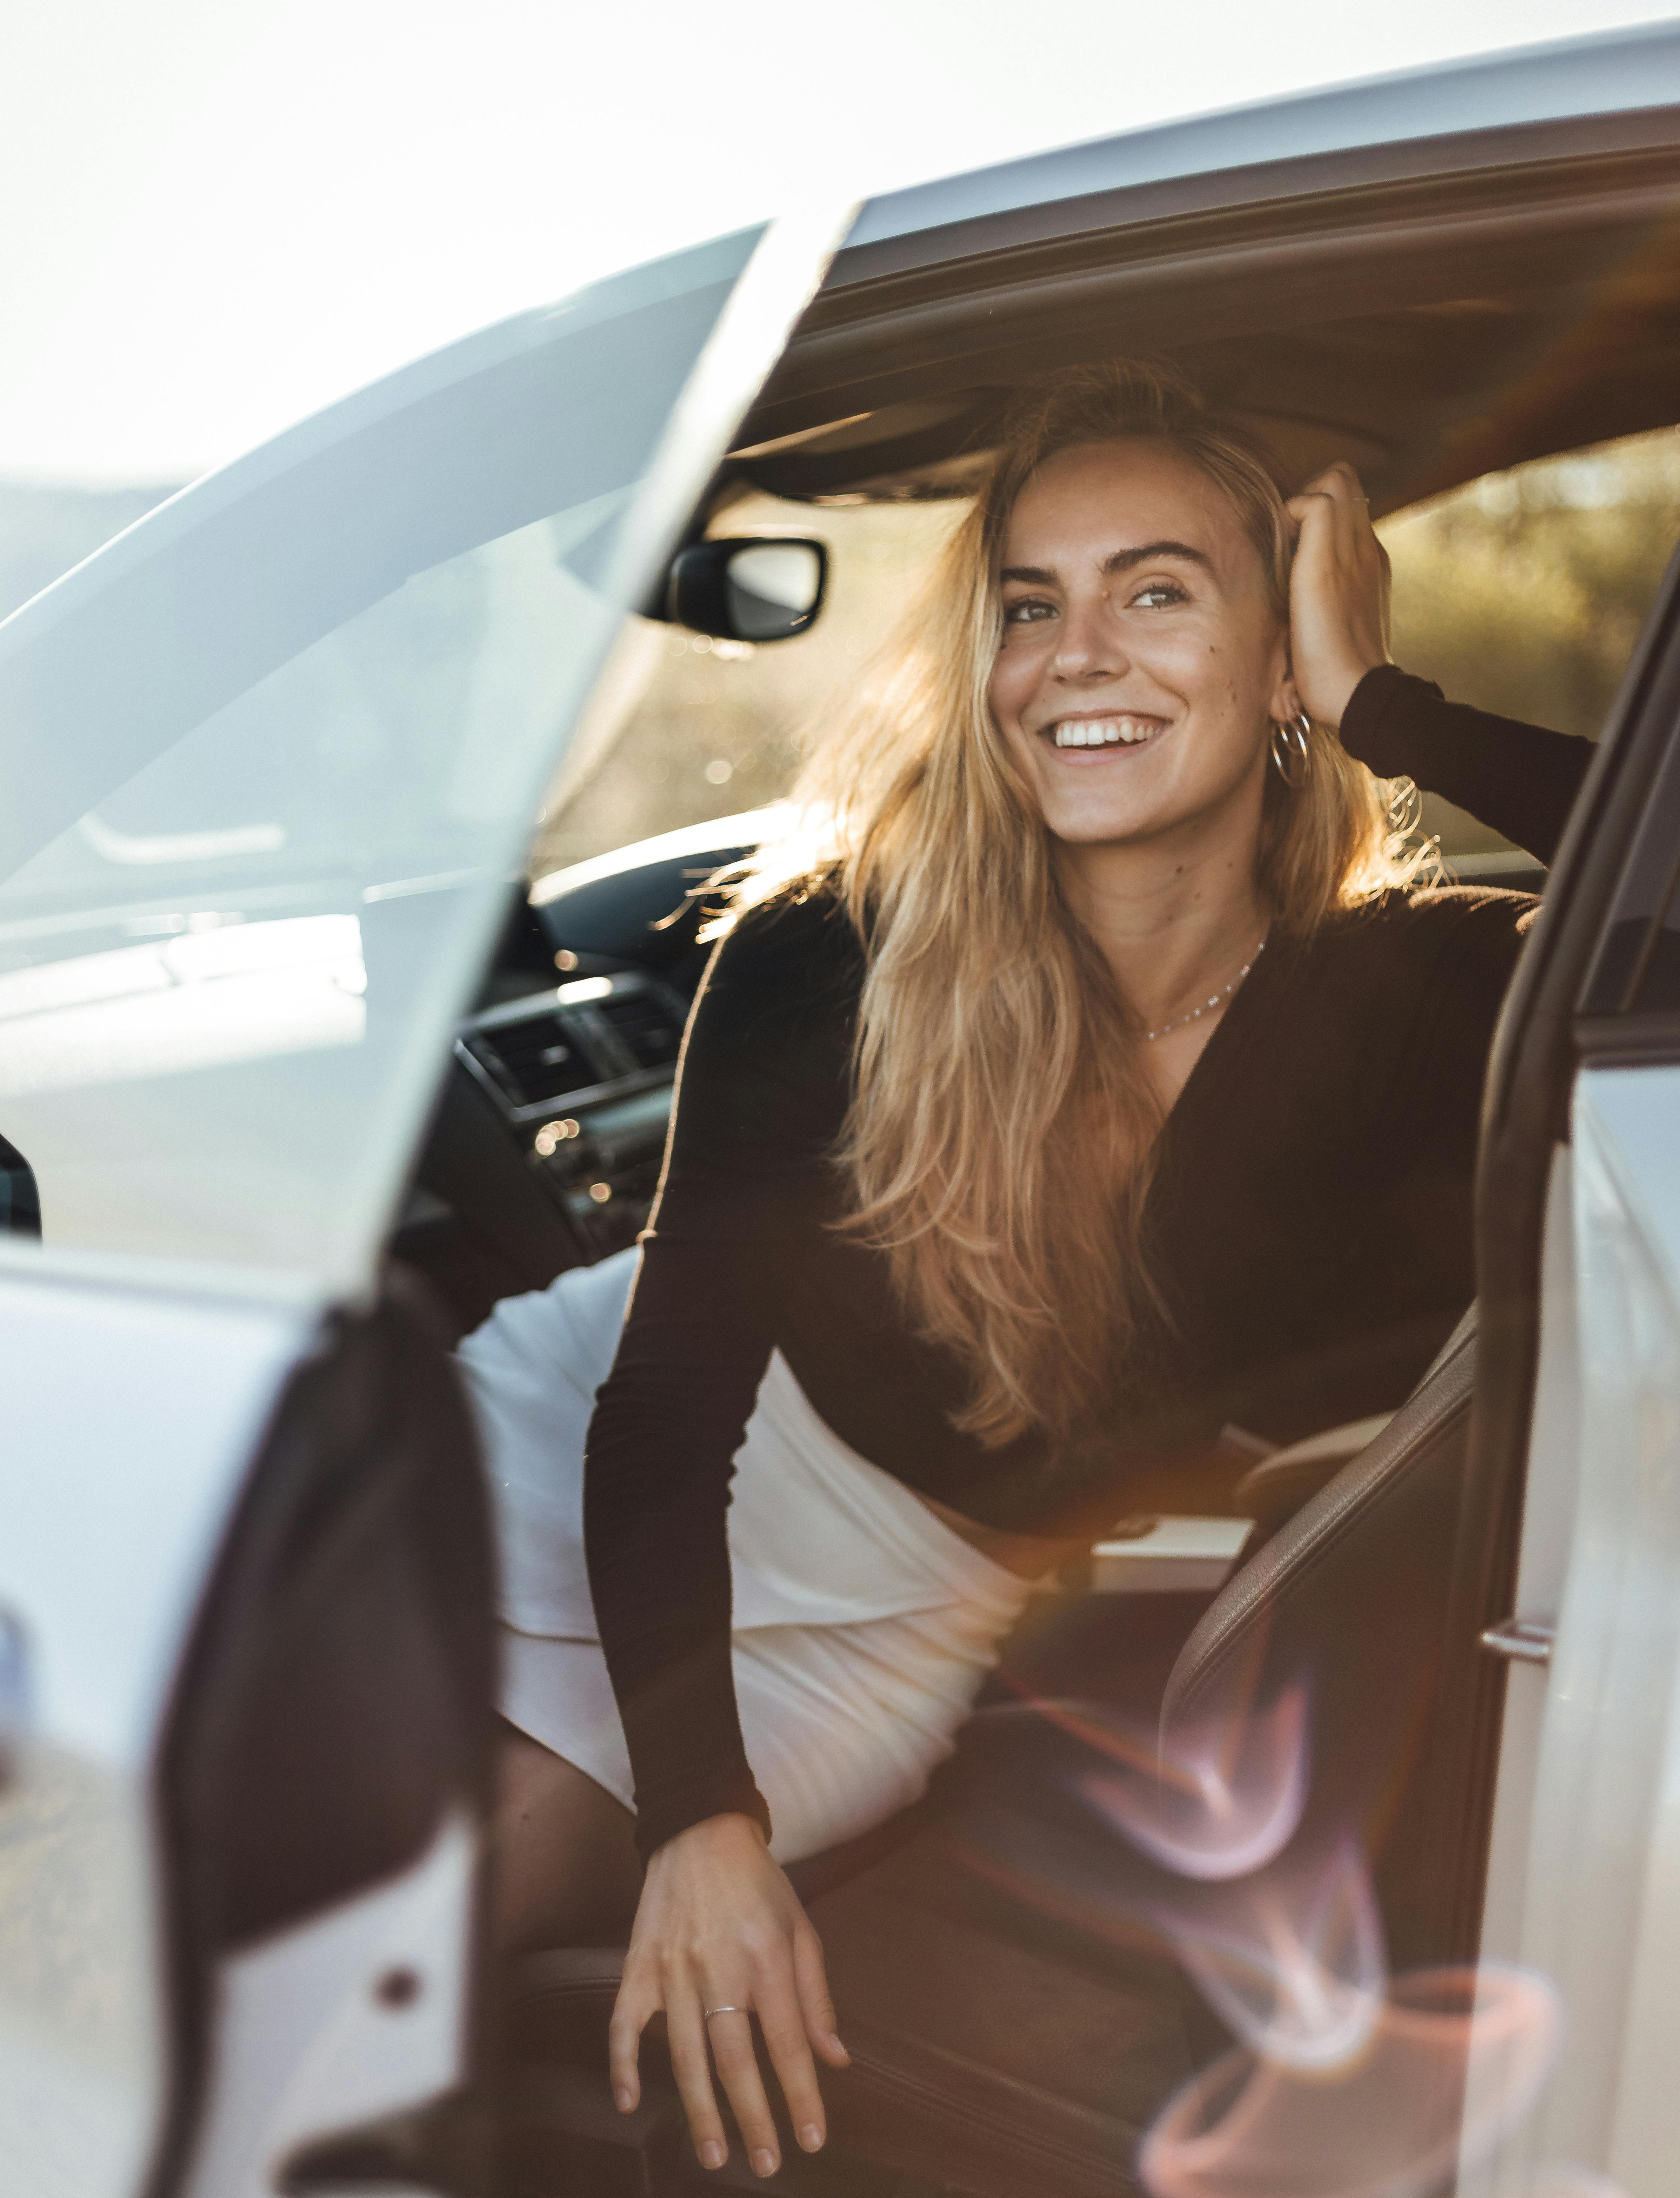 Woman Wearing Black Long Sleeves and White Skirt Sitting Inside a Car ·  Free Stock Photo